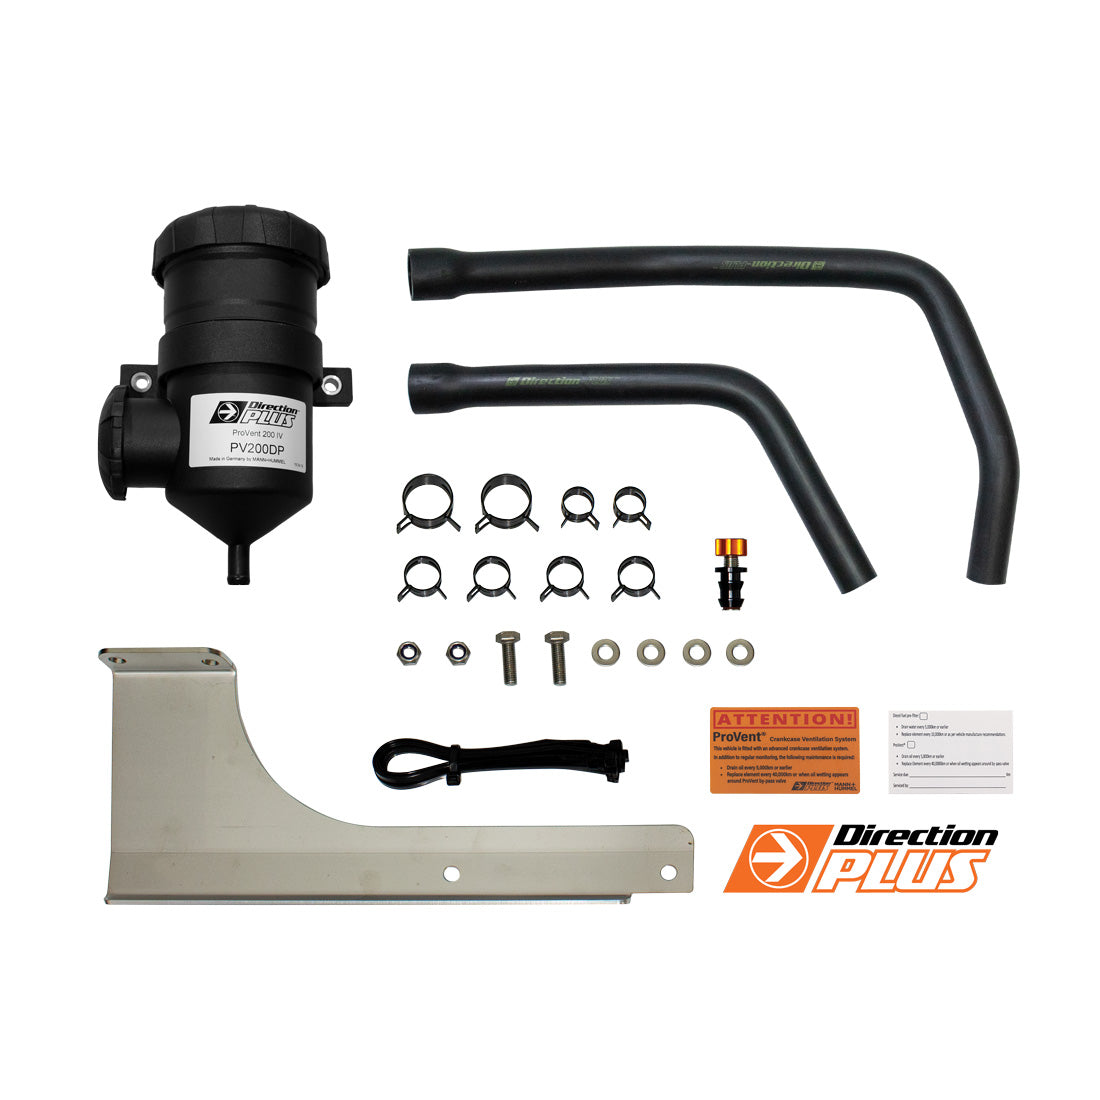 N80 Hilux / 1GD Fortuner Pre Filter and Catch Can Combo -  (FMPV628DPC) - Common Rail Cowboys